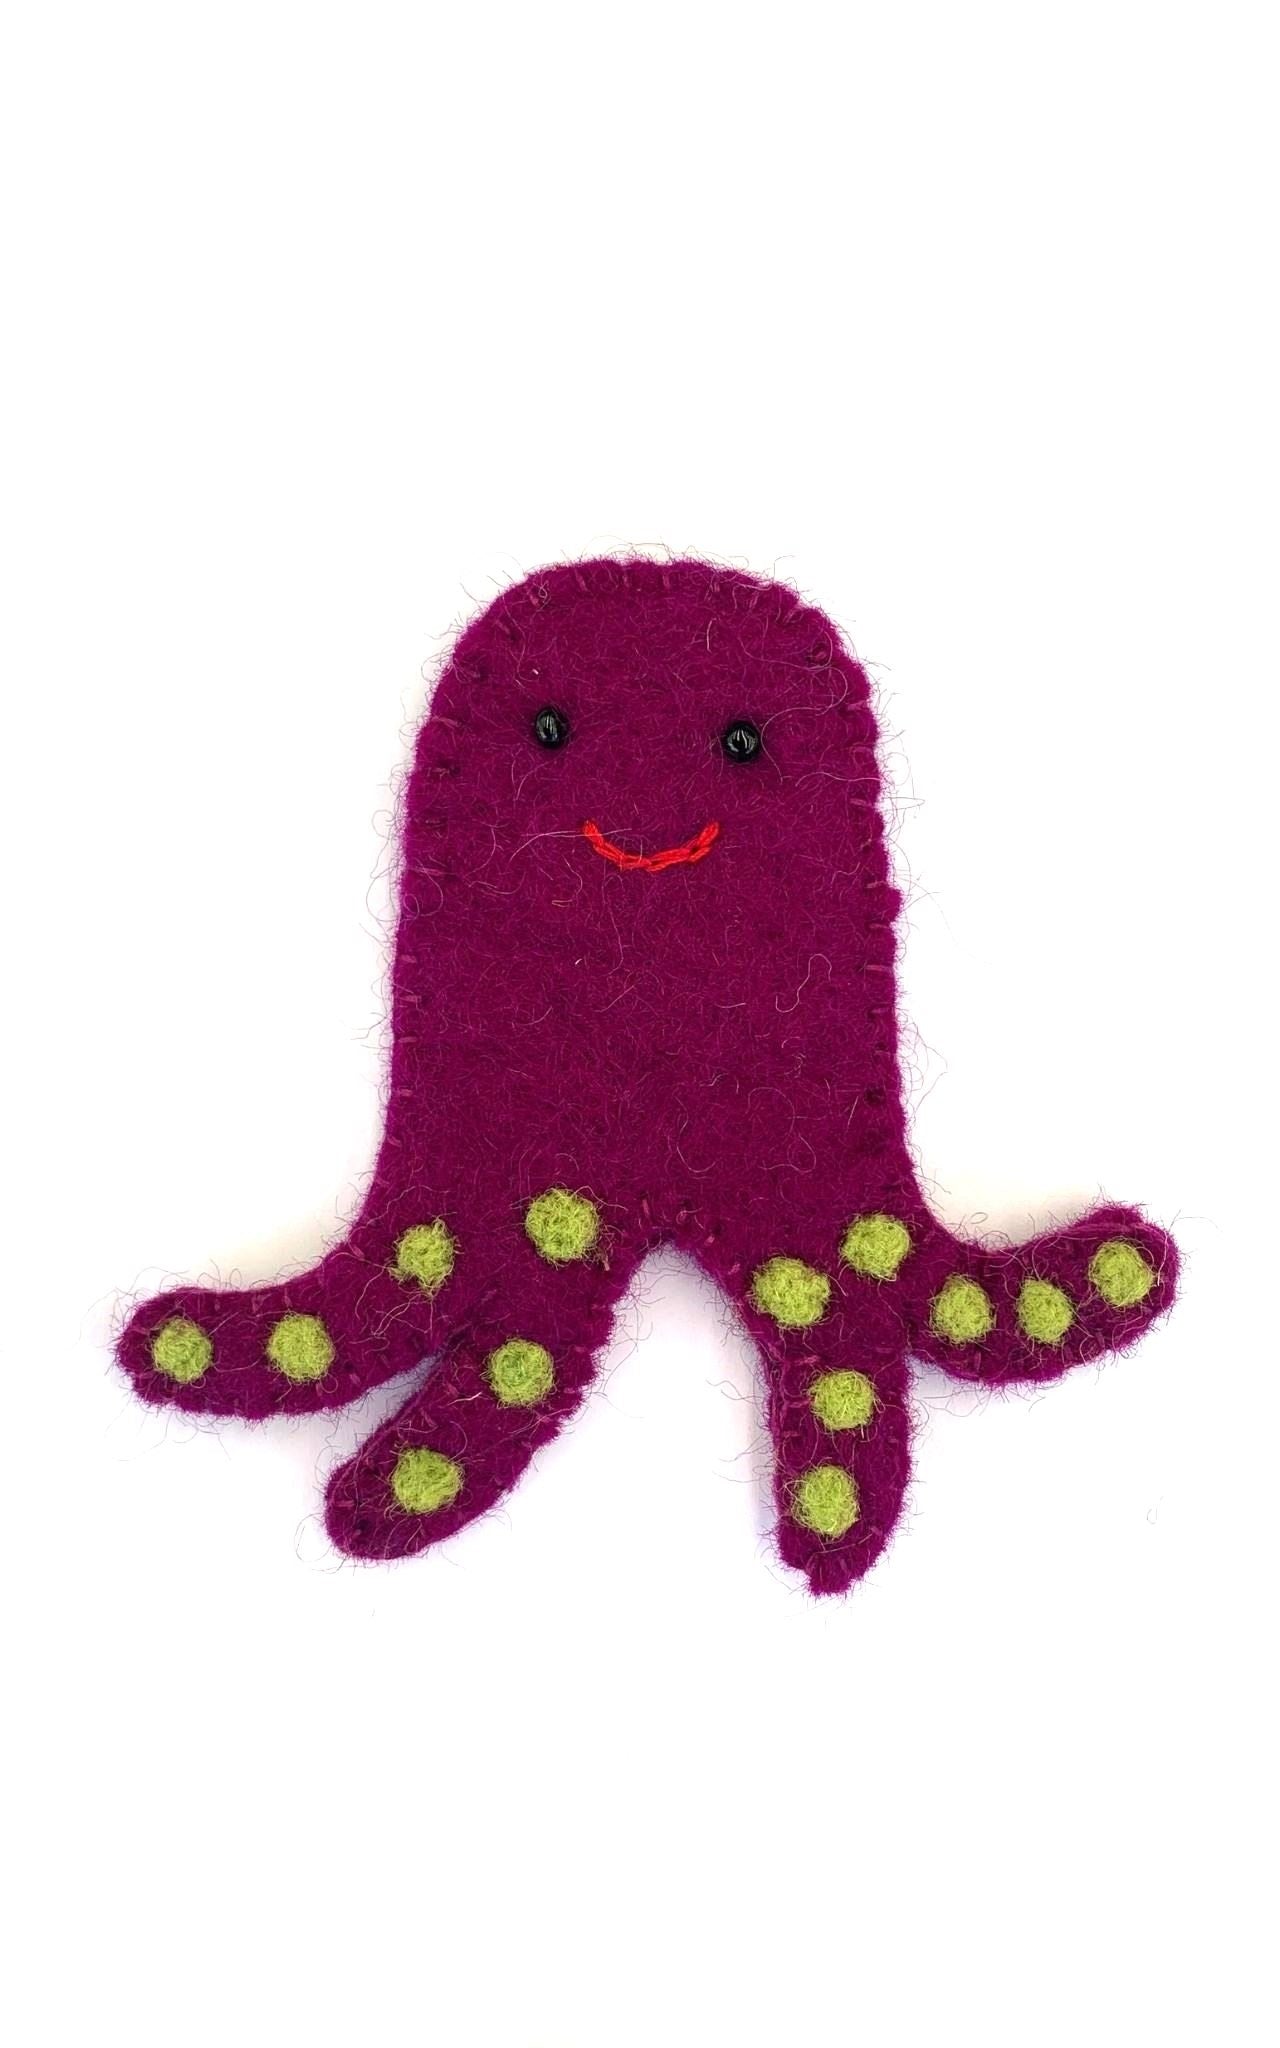 Surya Australia Ethical Wool Felt Finger Puppets made in Nepal - Octopus